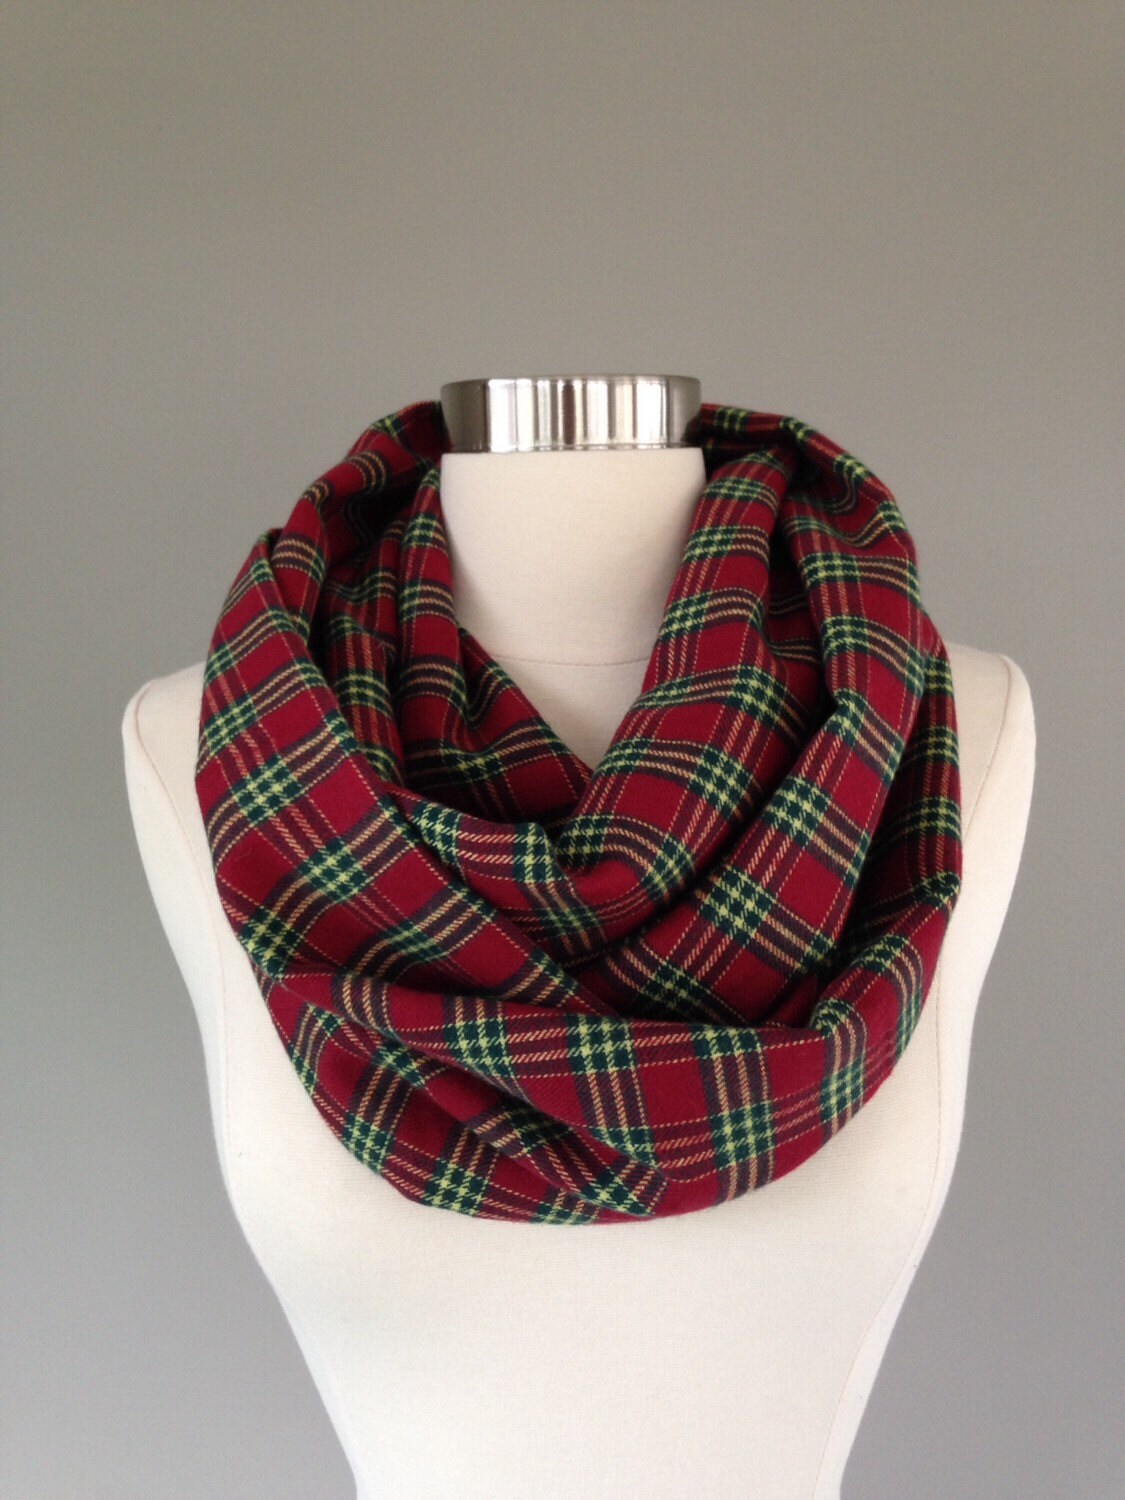 Women's red and green plaid infinty scarf flannel by shopVmarie